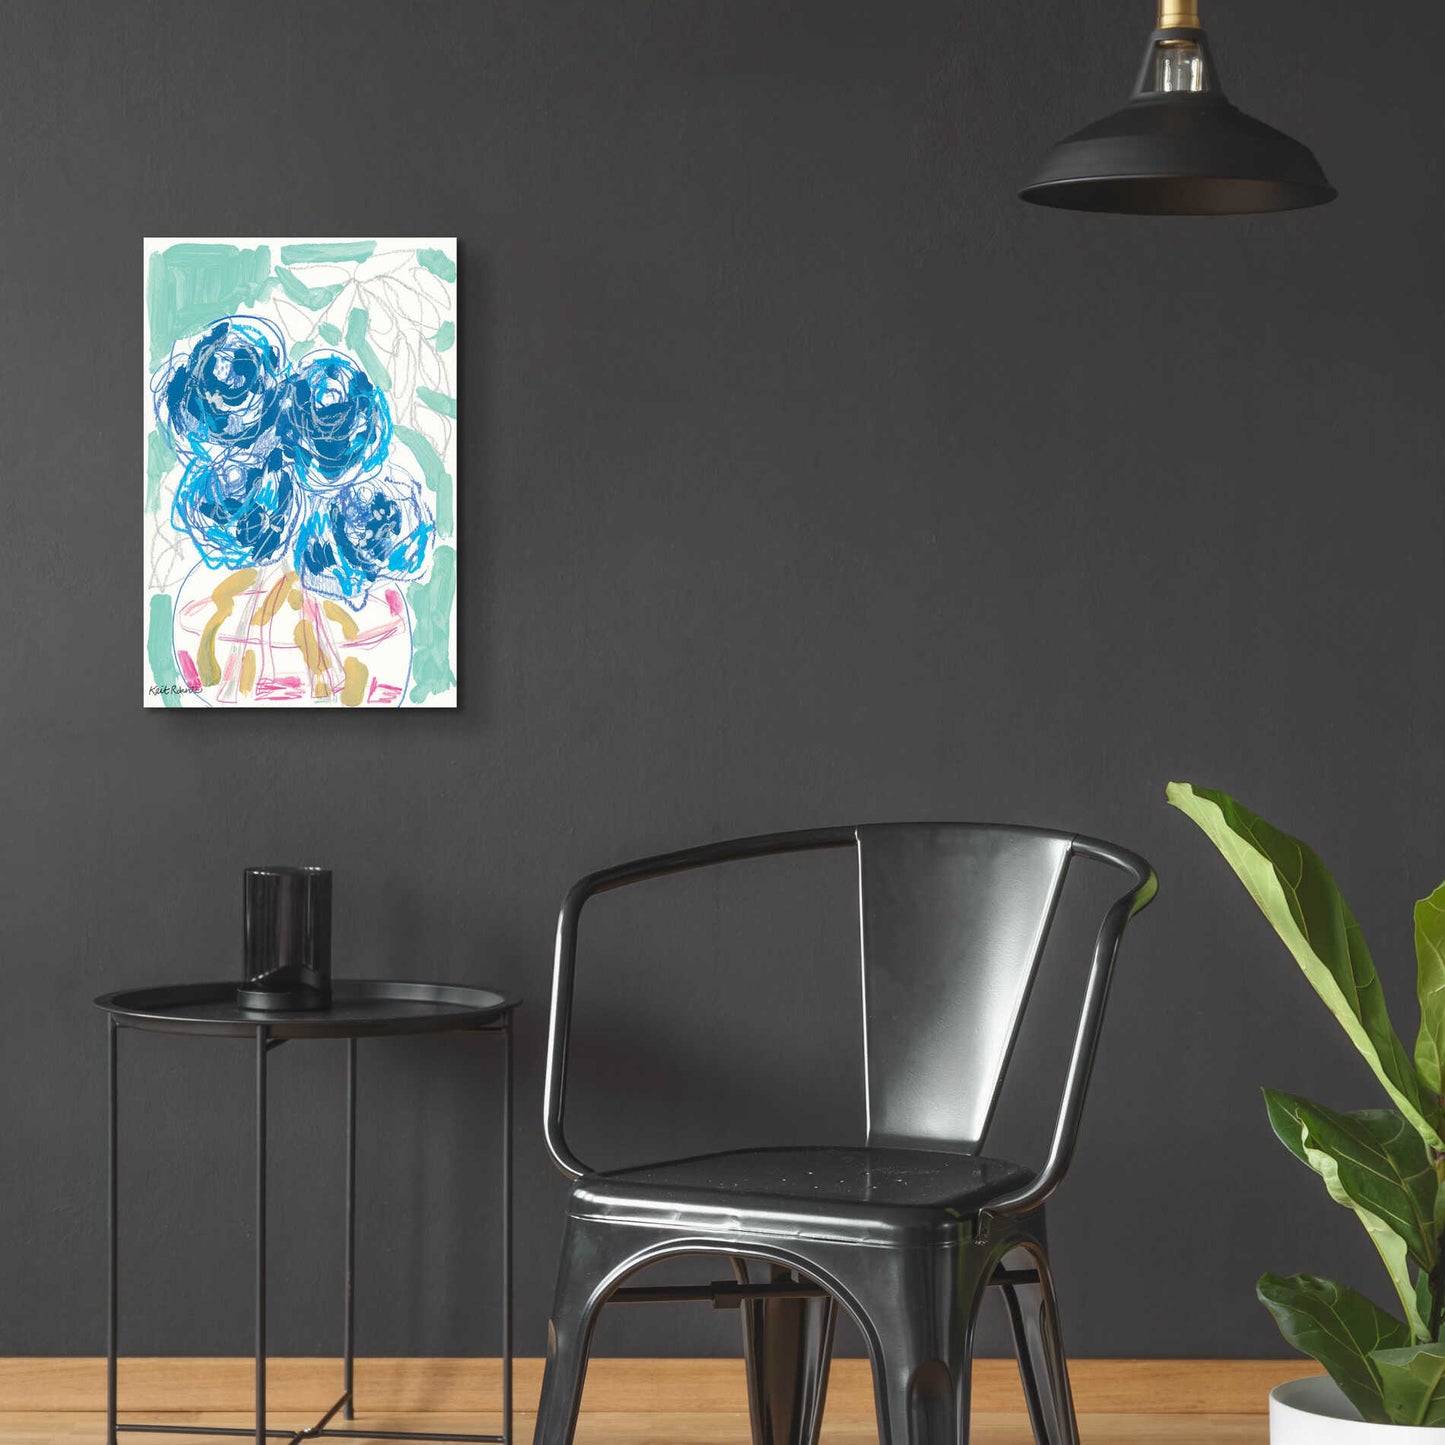 Epic Art 'Nightstand Blooms in Water' by Kait Roberts, Acrylic Glass Wall Art,16x24